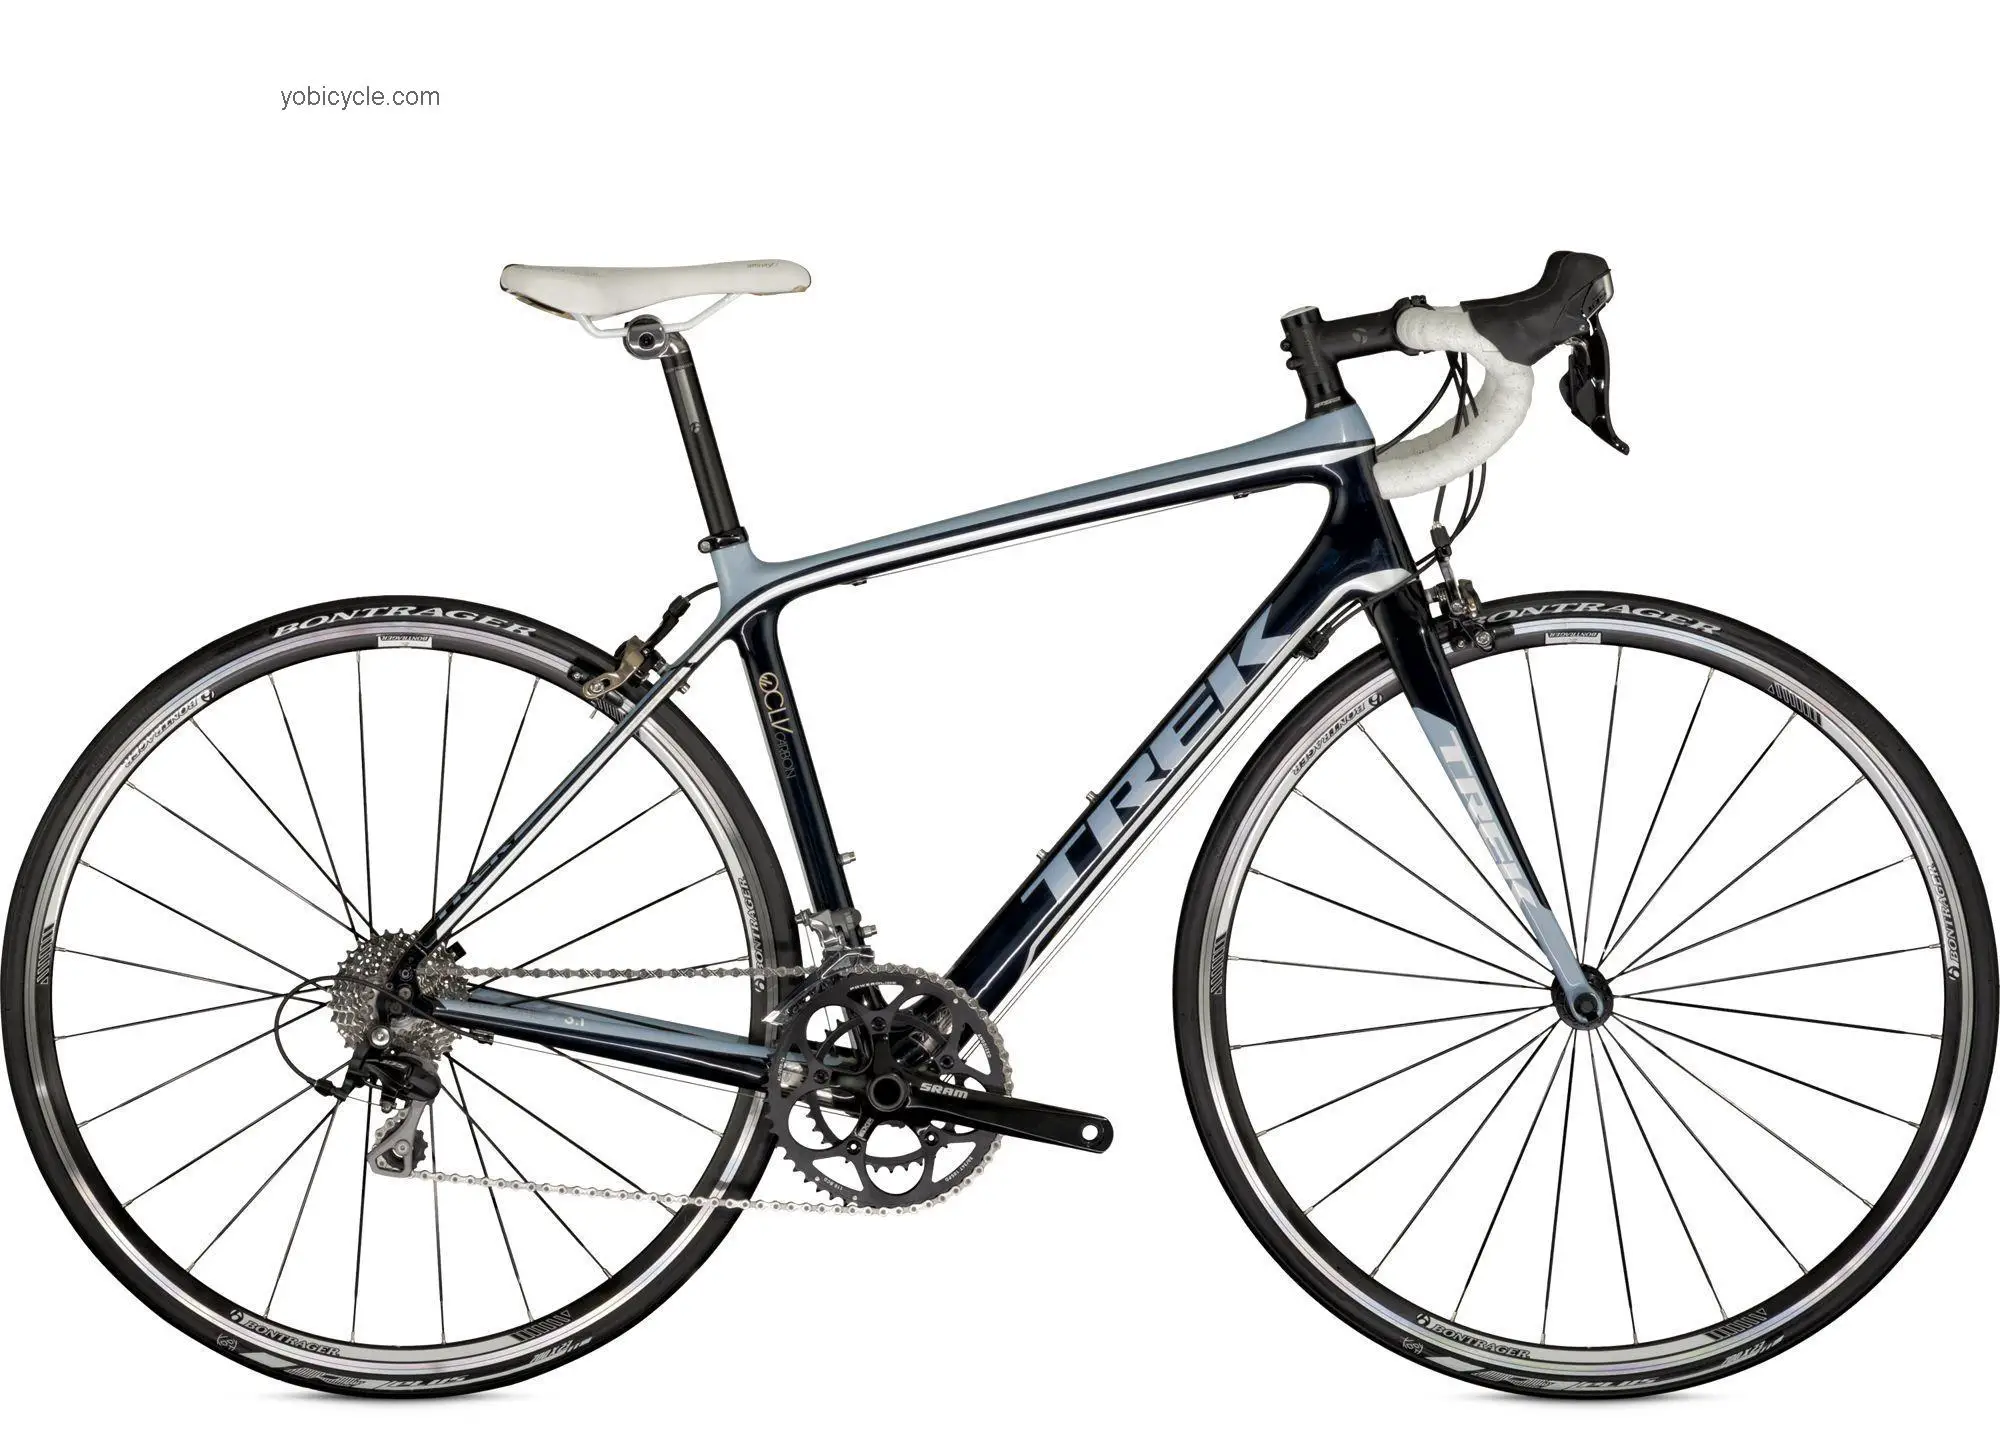 Trek Madone 3.1 WSD 2013 comparison online with competitors